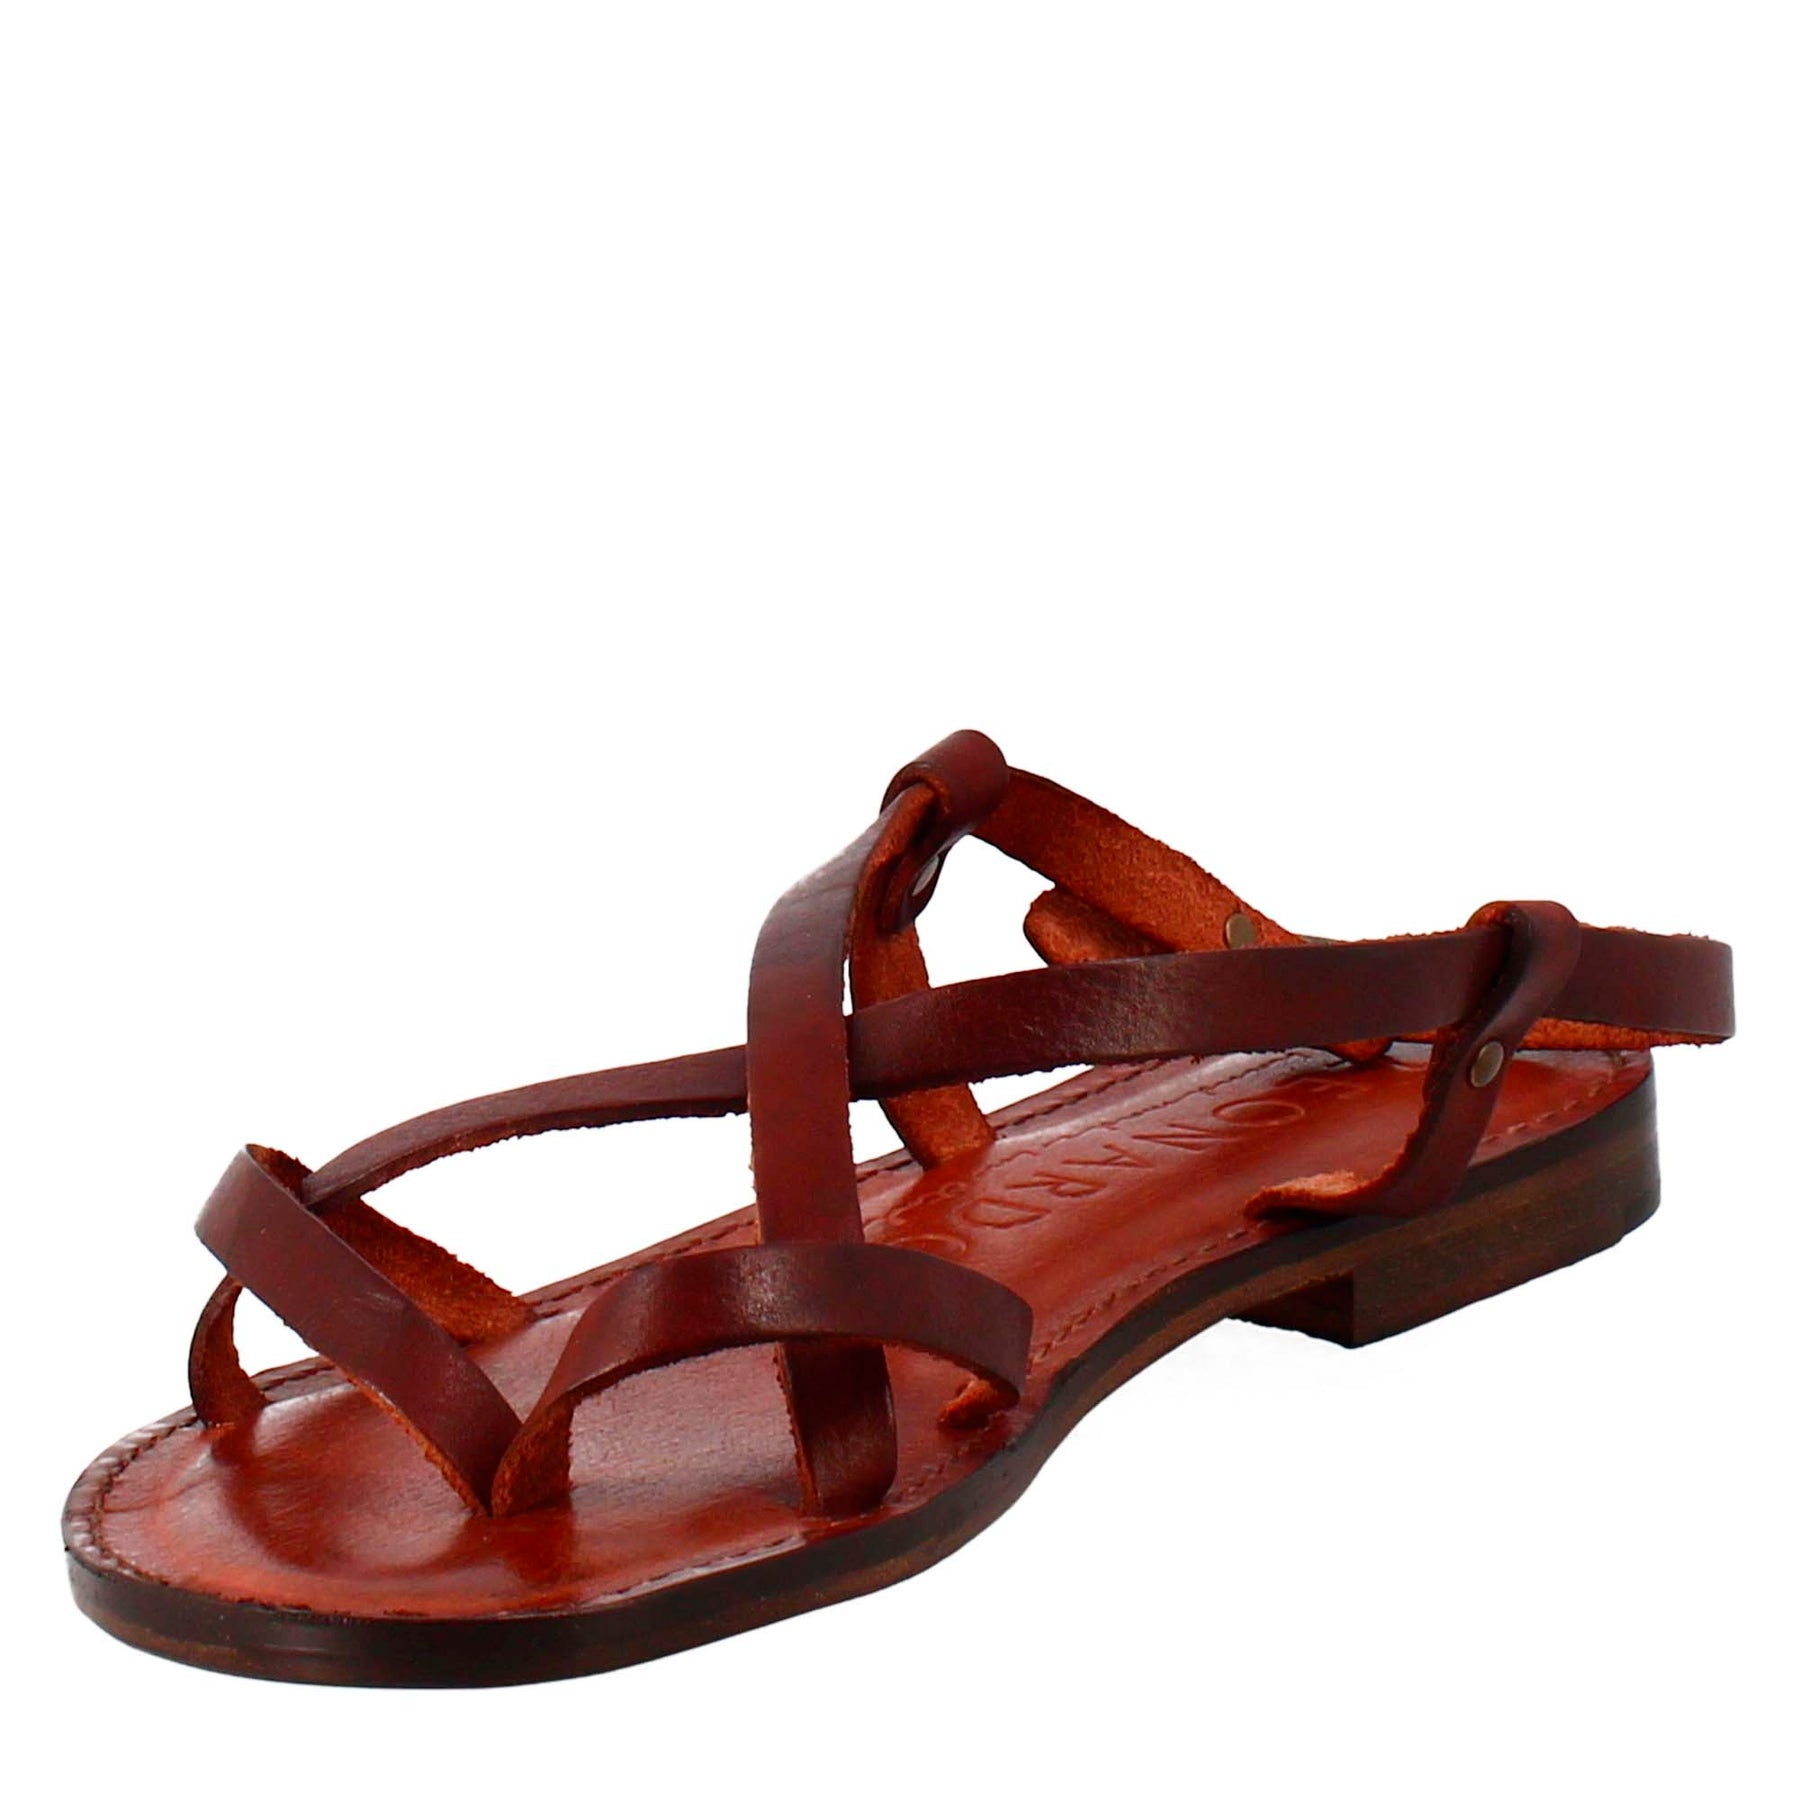 Solace sandals for women Ancient Roman style in brown leather